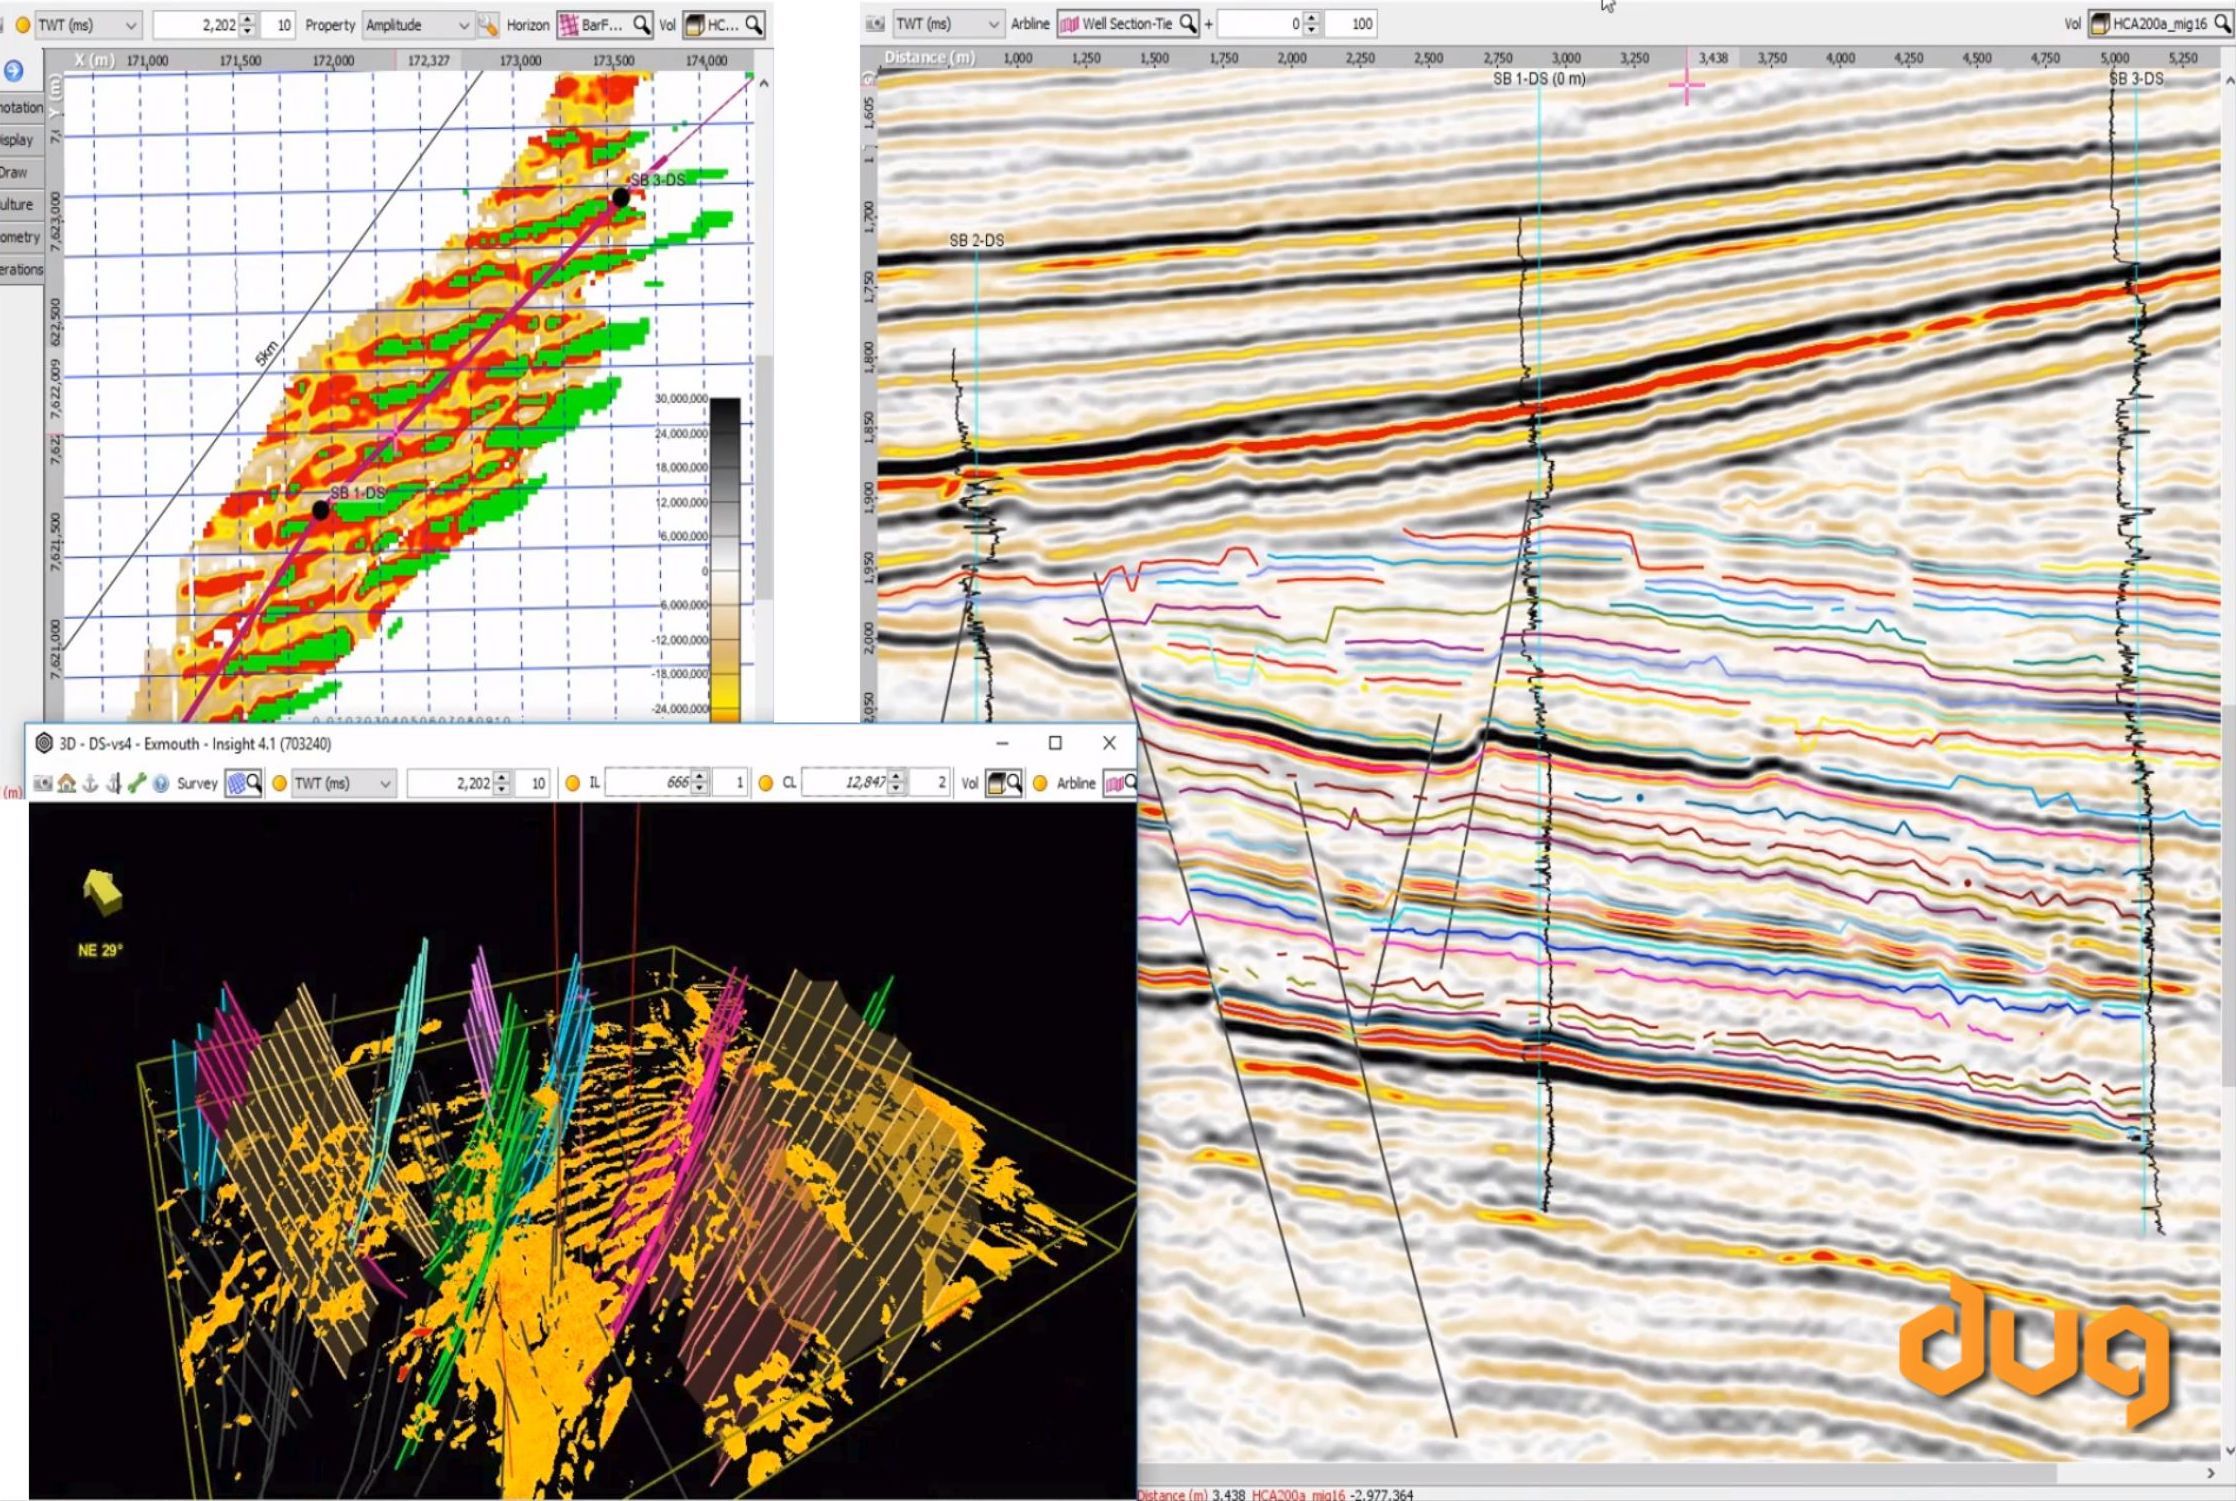 Image: using DUG Insight software to explore sequence stratigraphy